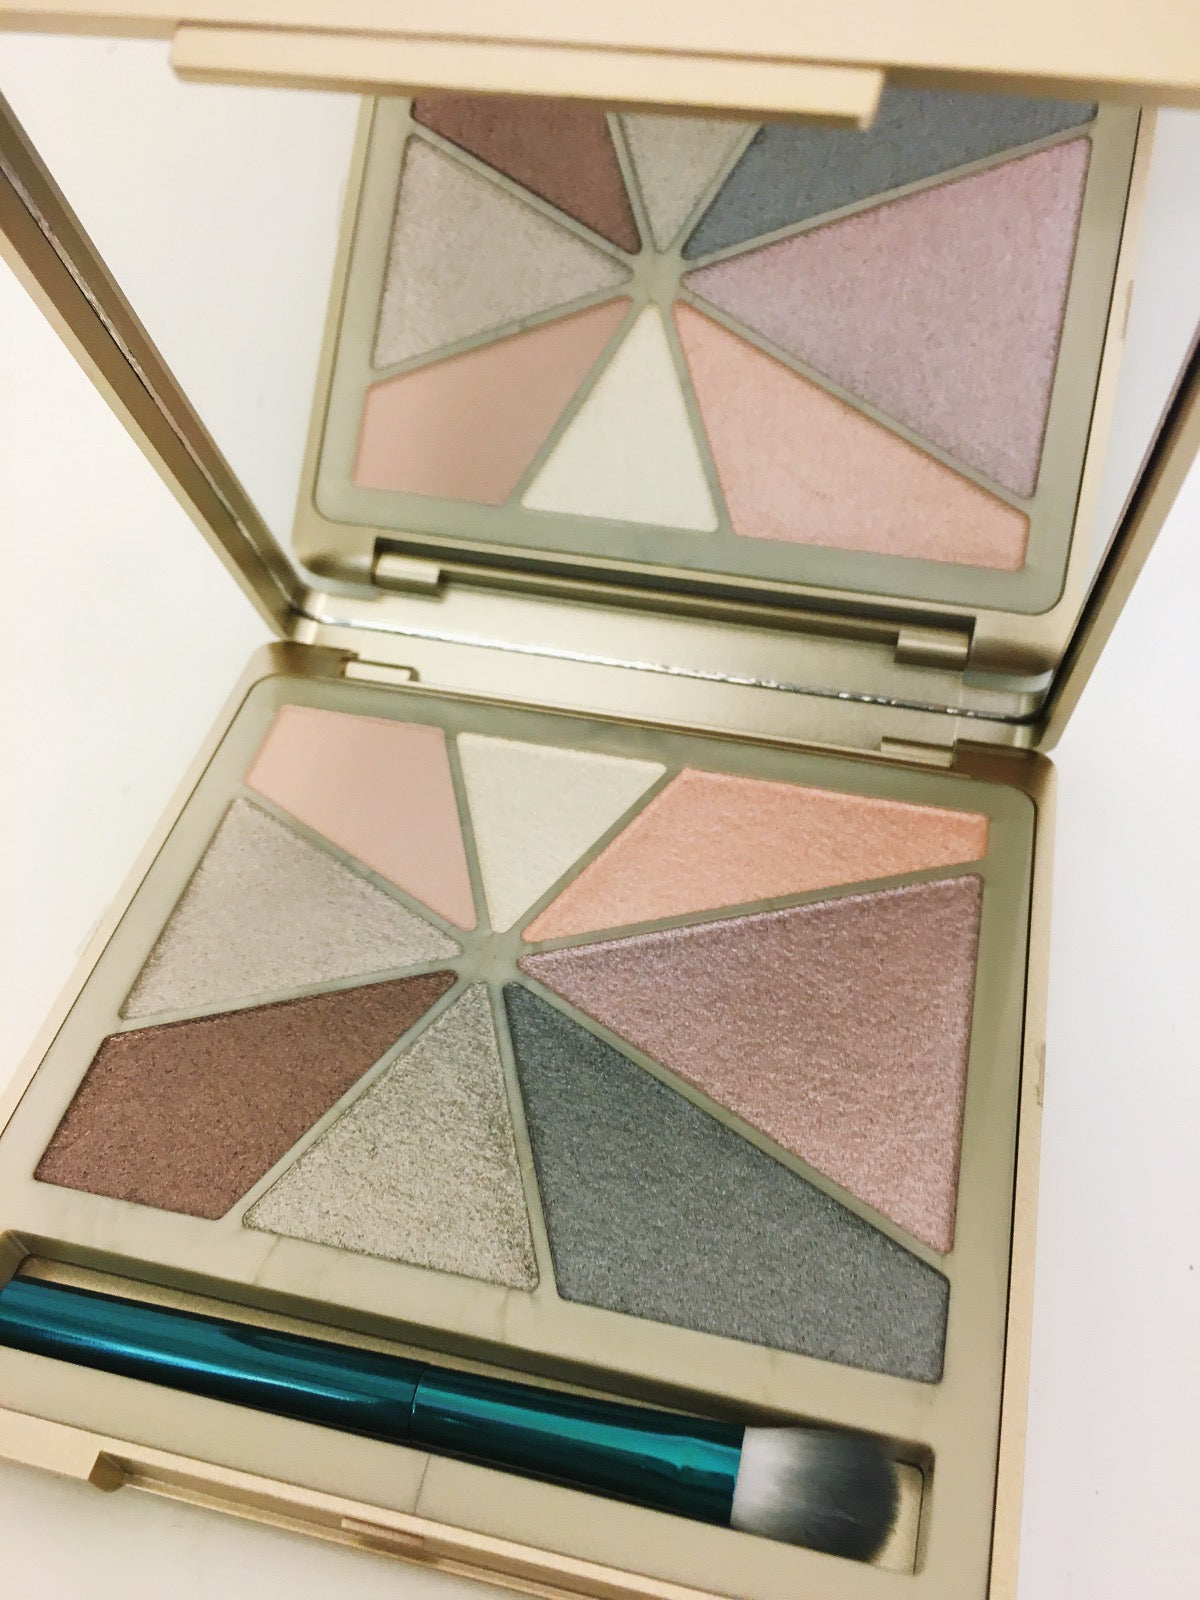 Review, Swatches, Makeup Trends 2018, 2019: No7 Glamorous Nudes Eyeshadow Palette